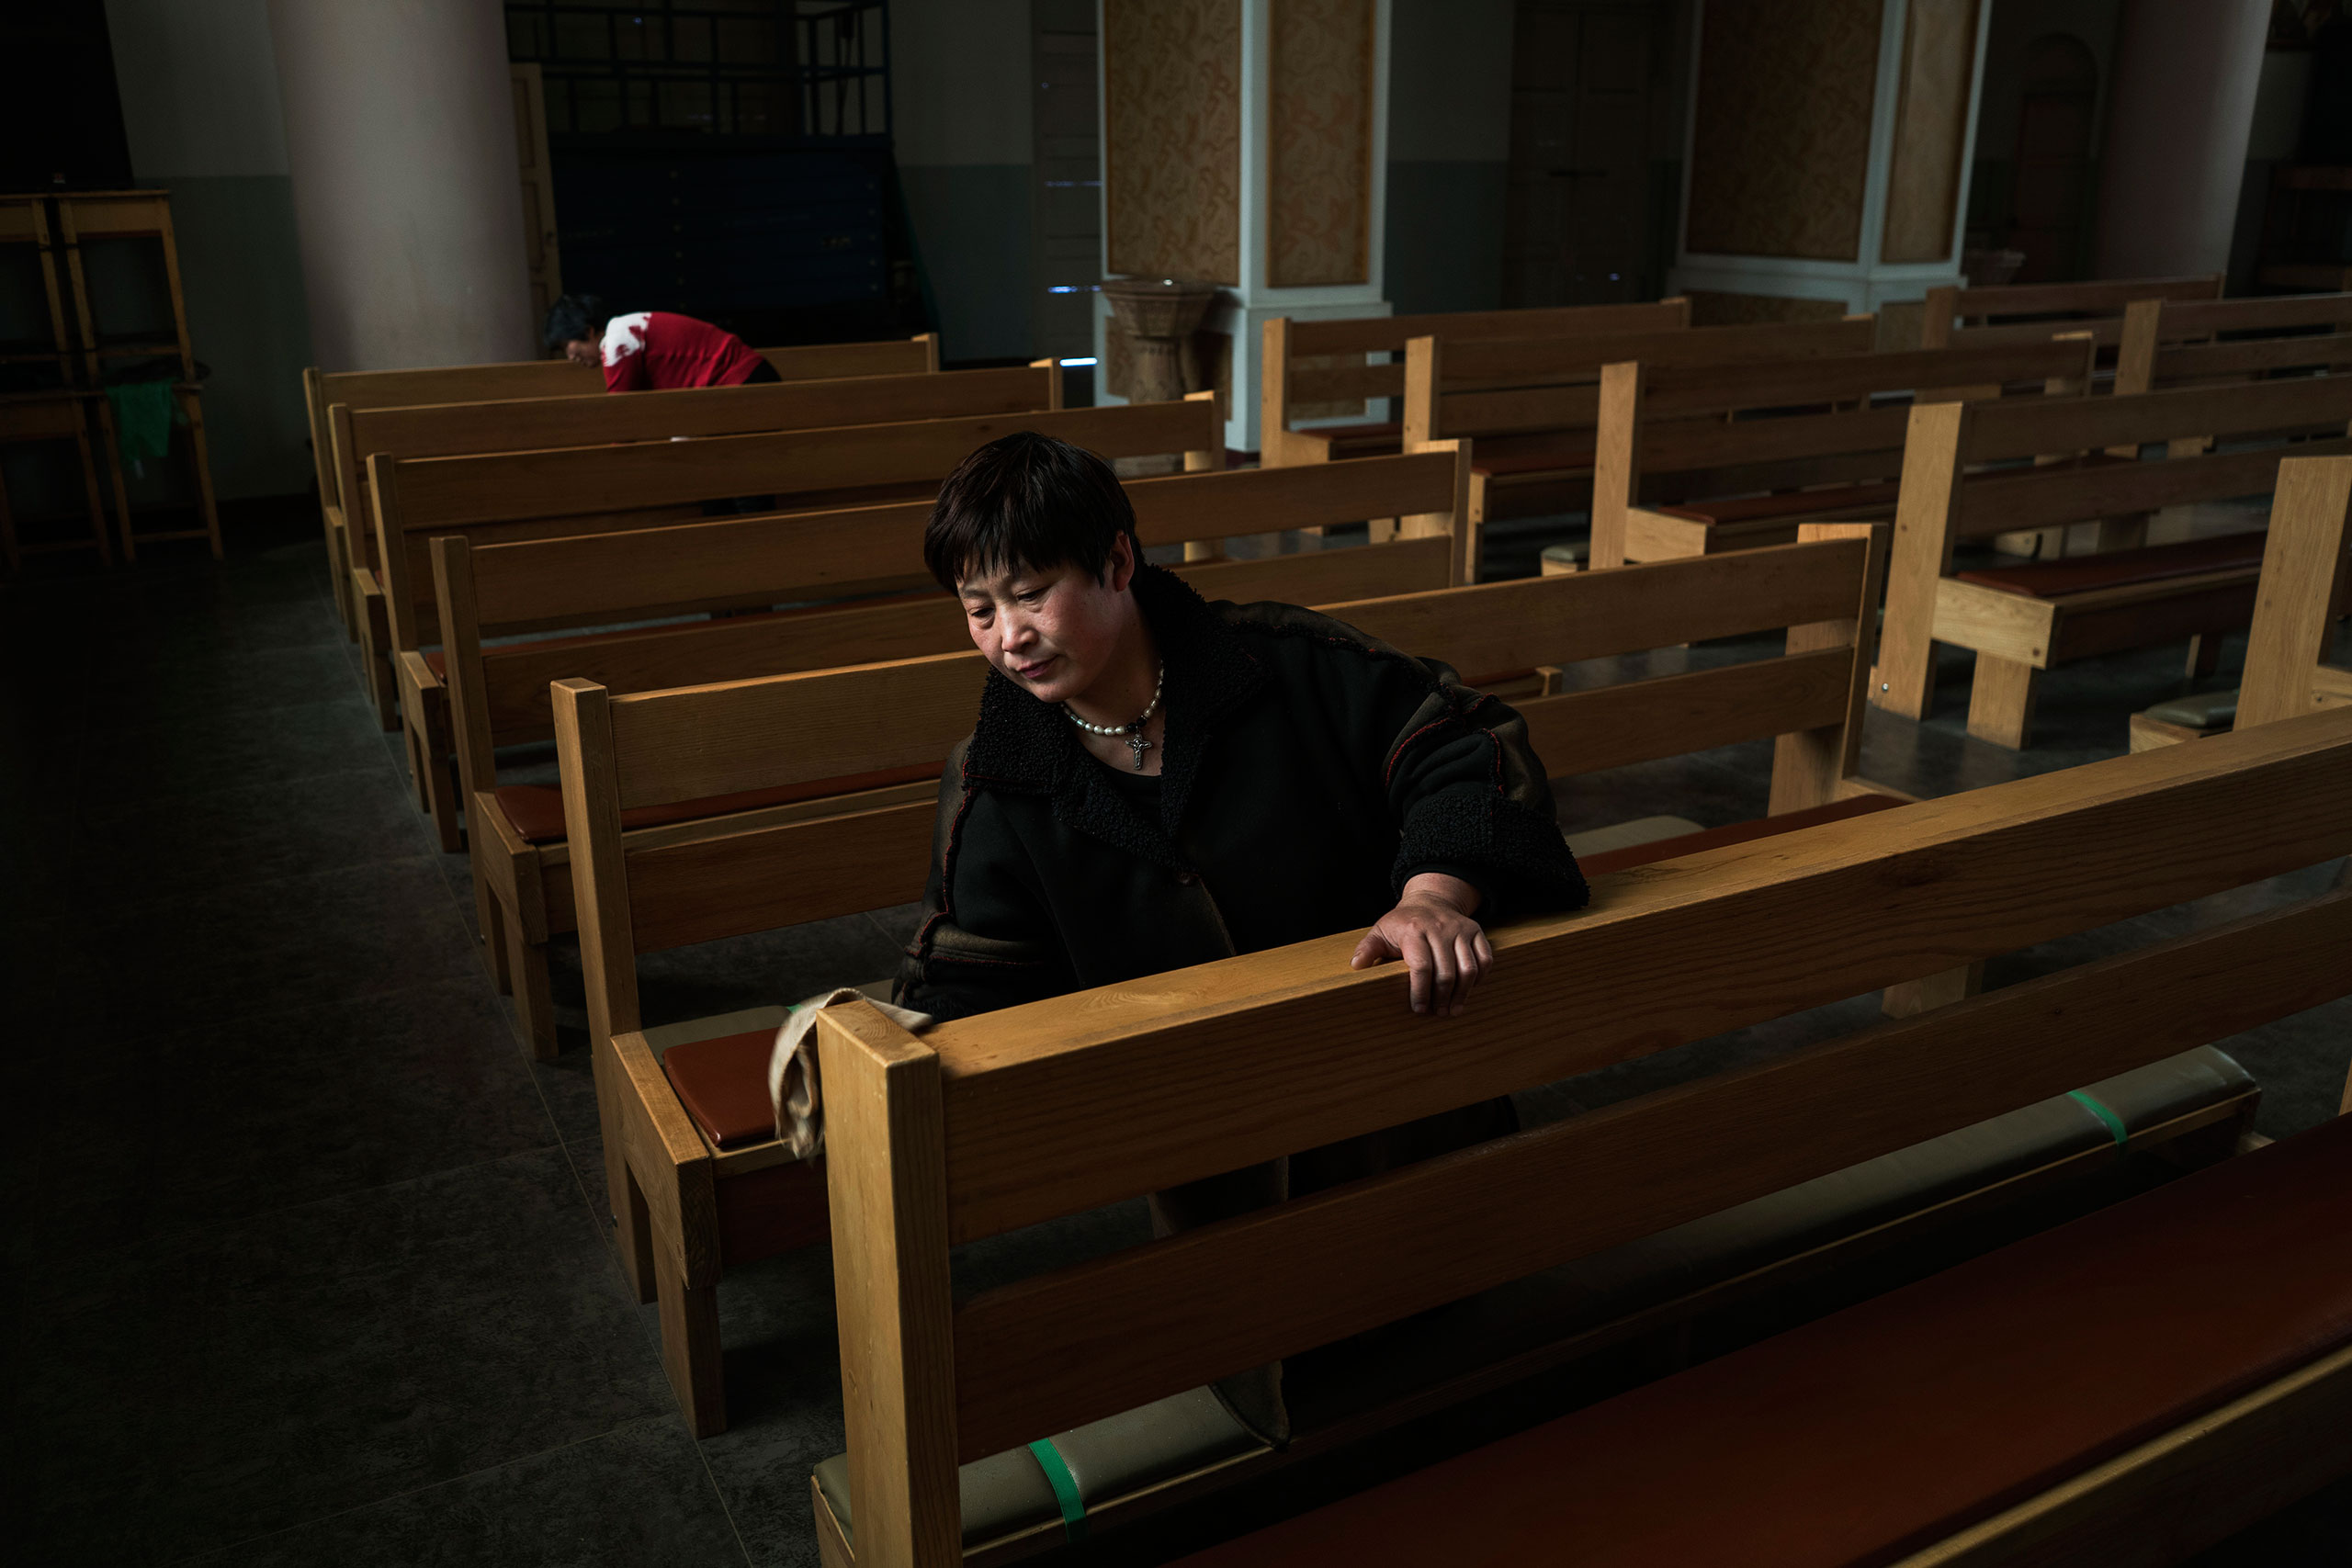 A volunteer cleans a pew ahead of a Mass at the government sanctioned Catholic Church of Virgin Mary in Donglu, near Baoding, China, March 20, 2016. Hebei has one of the largest populations of Christians in China who practice at both legal and underground Churches.